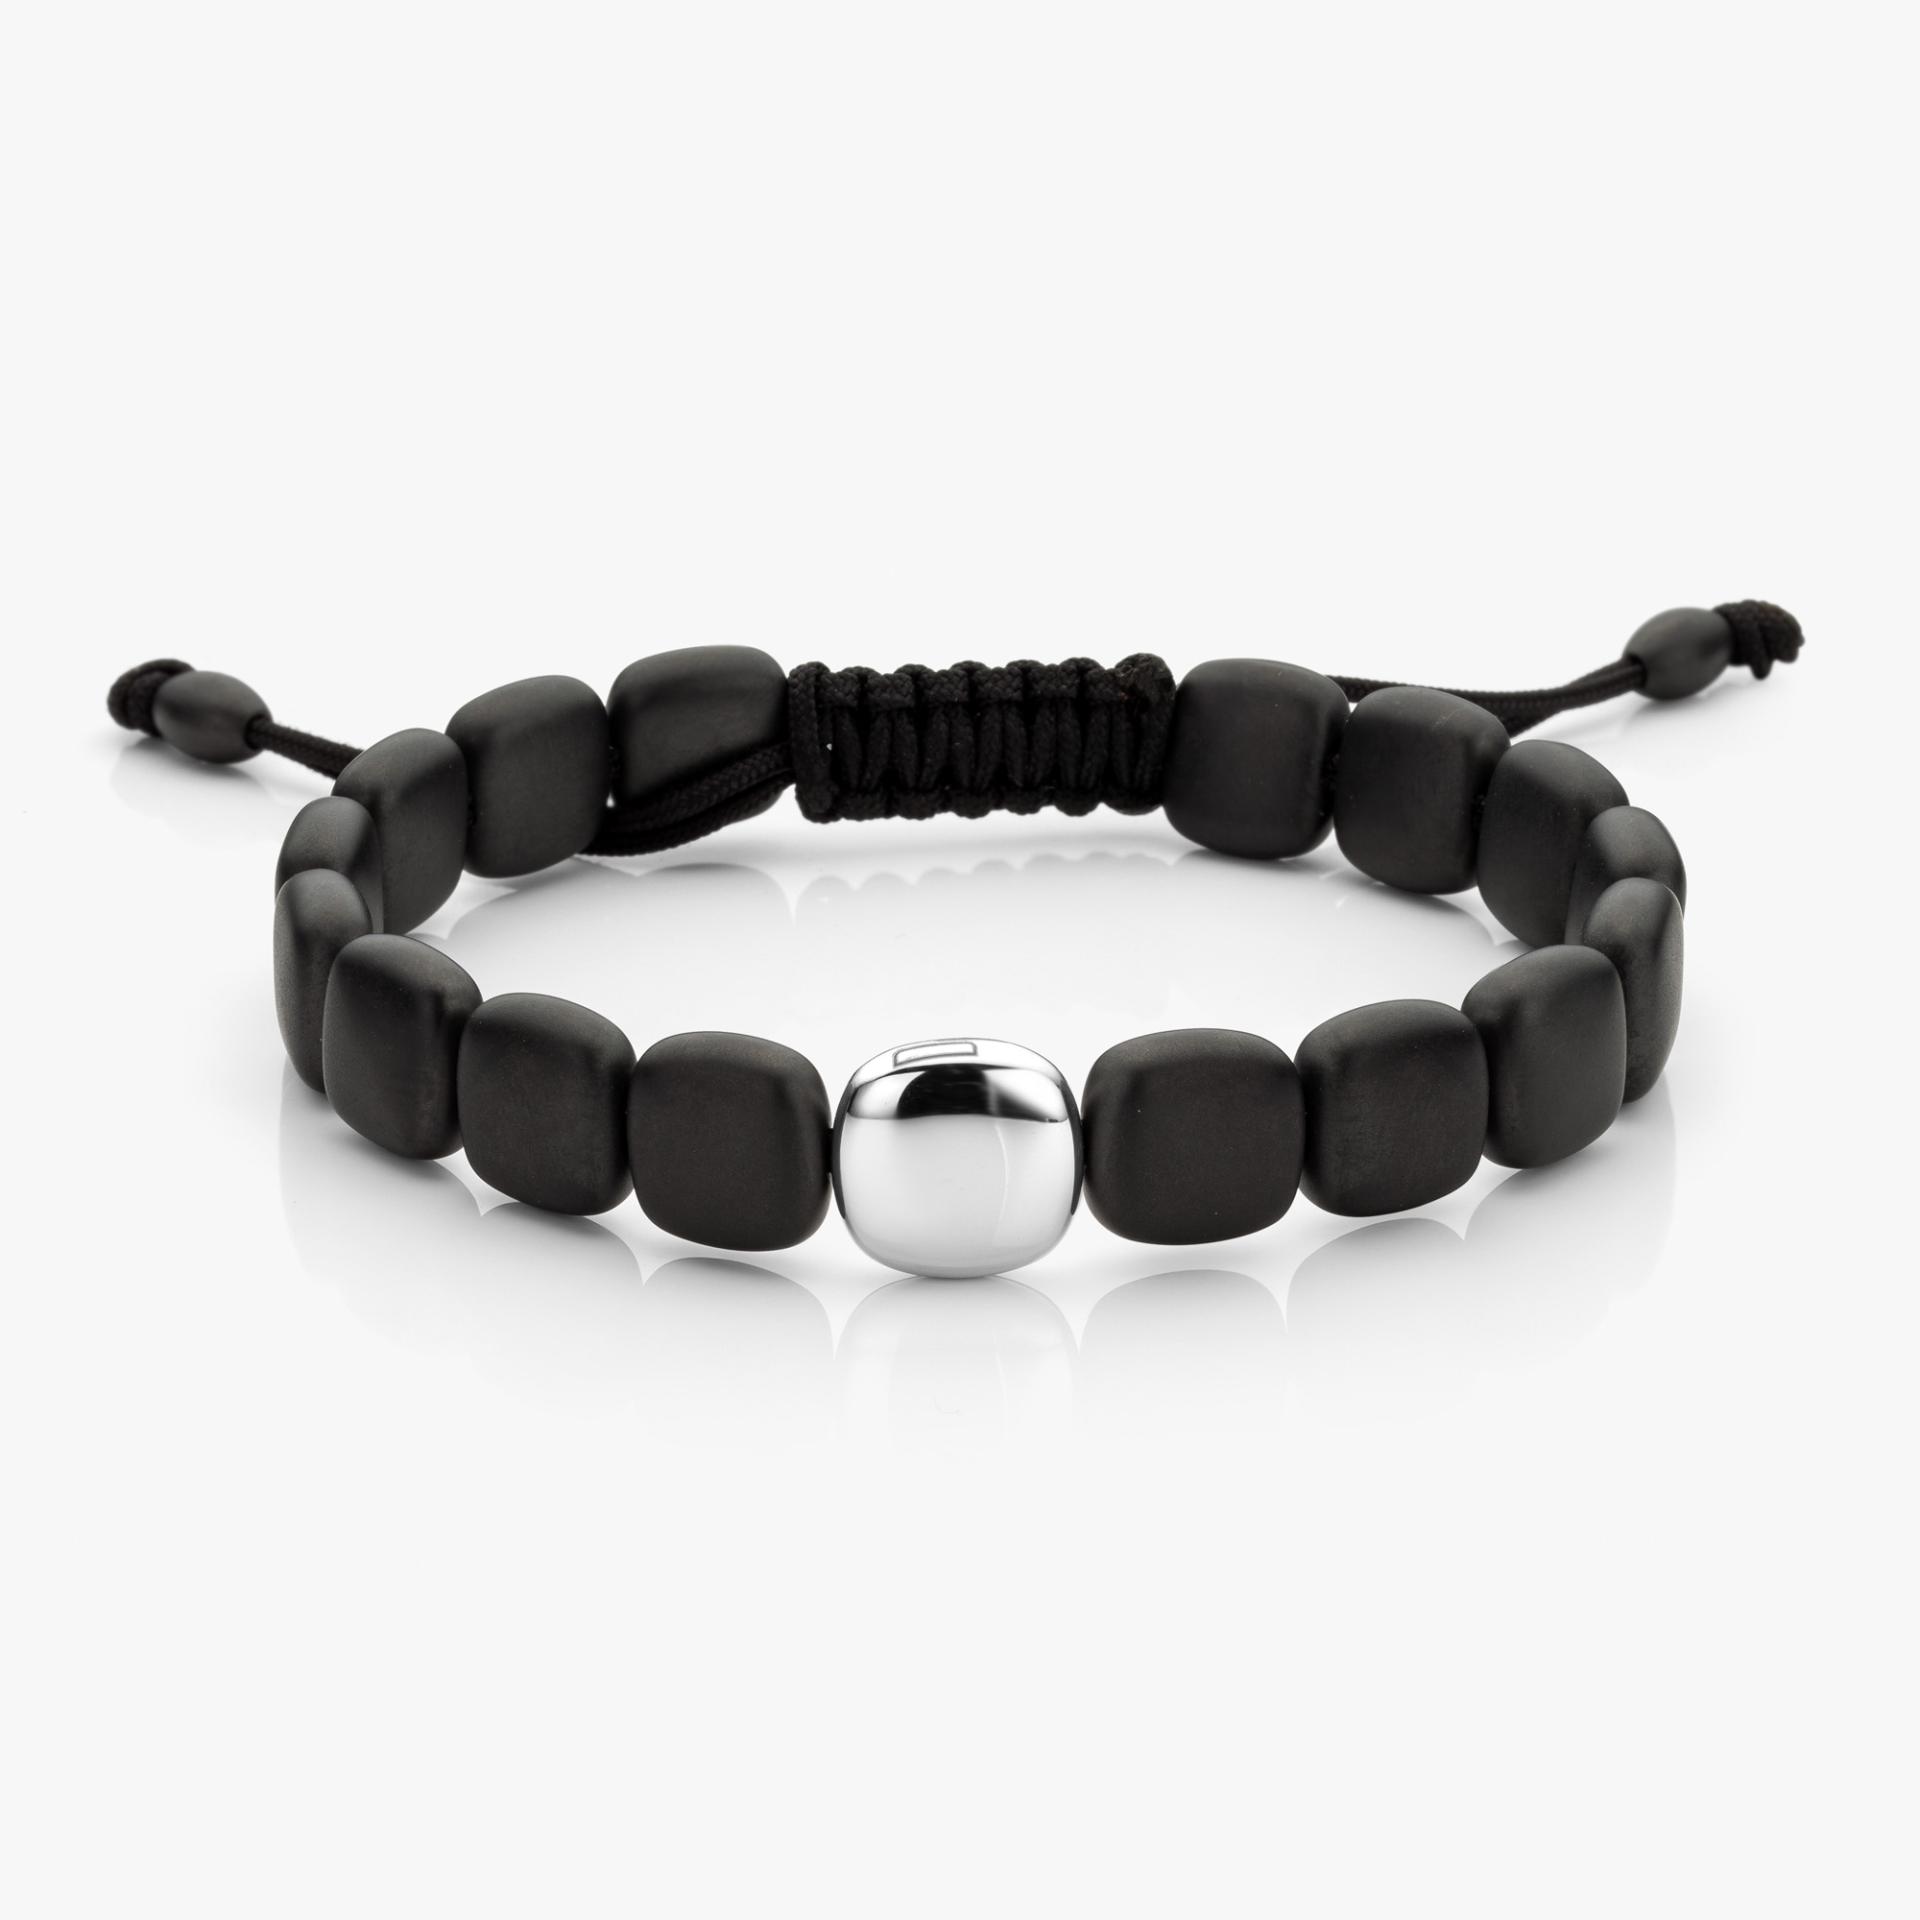 Bracelet in black ceramic and white gold made by Maison De Greef